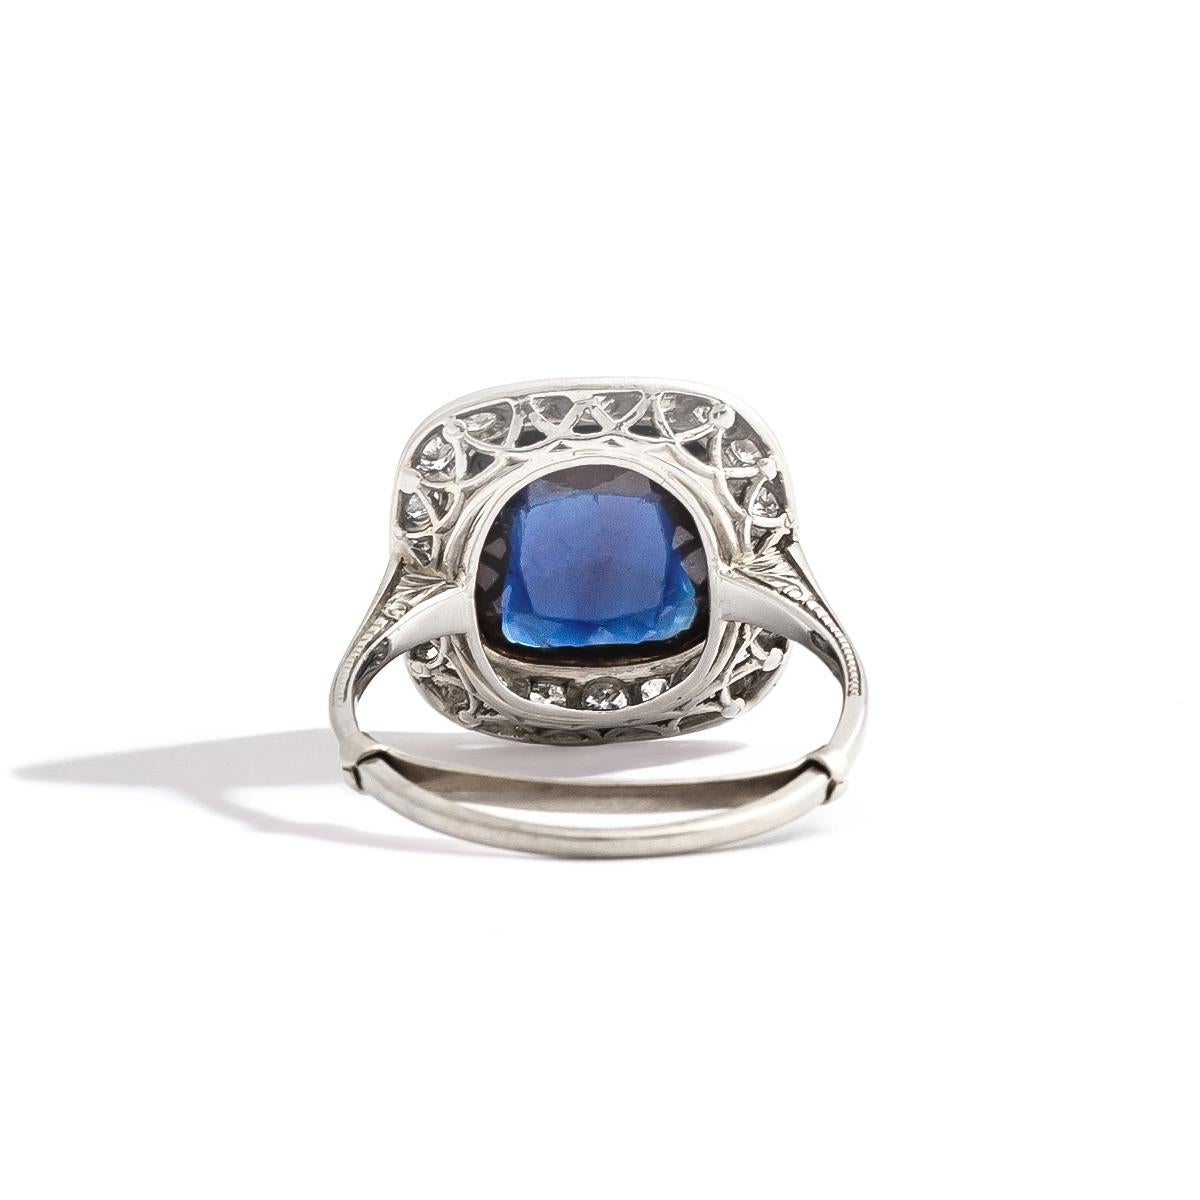 Sapphire cabochon surrounded by diamond on white gold and platinum Ring.
Sapphire Size: 10.00 x 10.00 millimeters.
Thickness: 3.86 millimeters.
Ring Size: 6 3/4.
Gross weight: 4.00 grams.